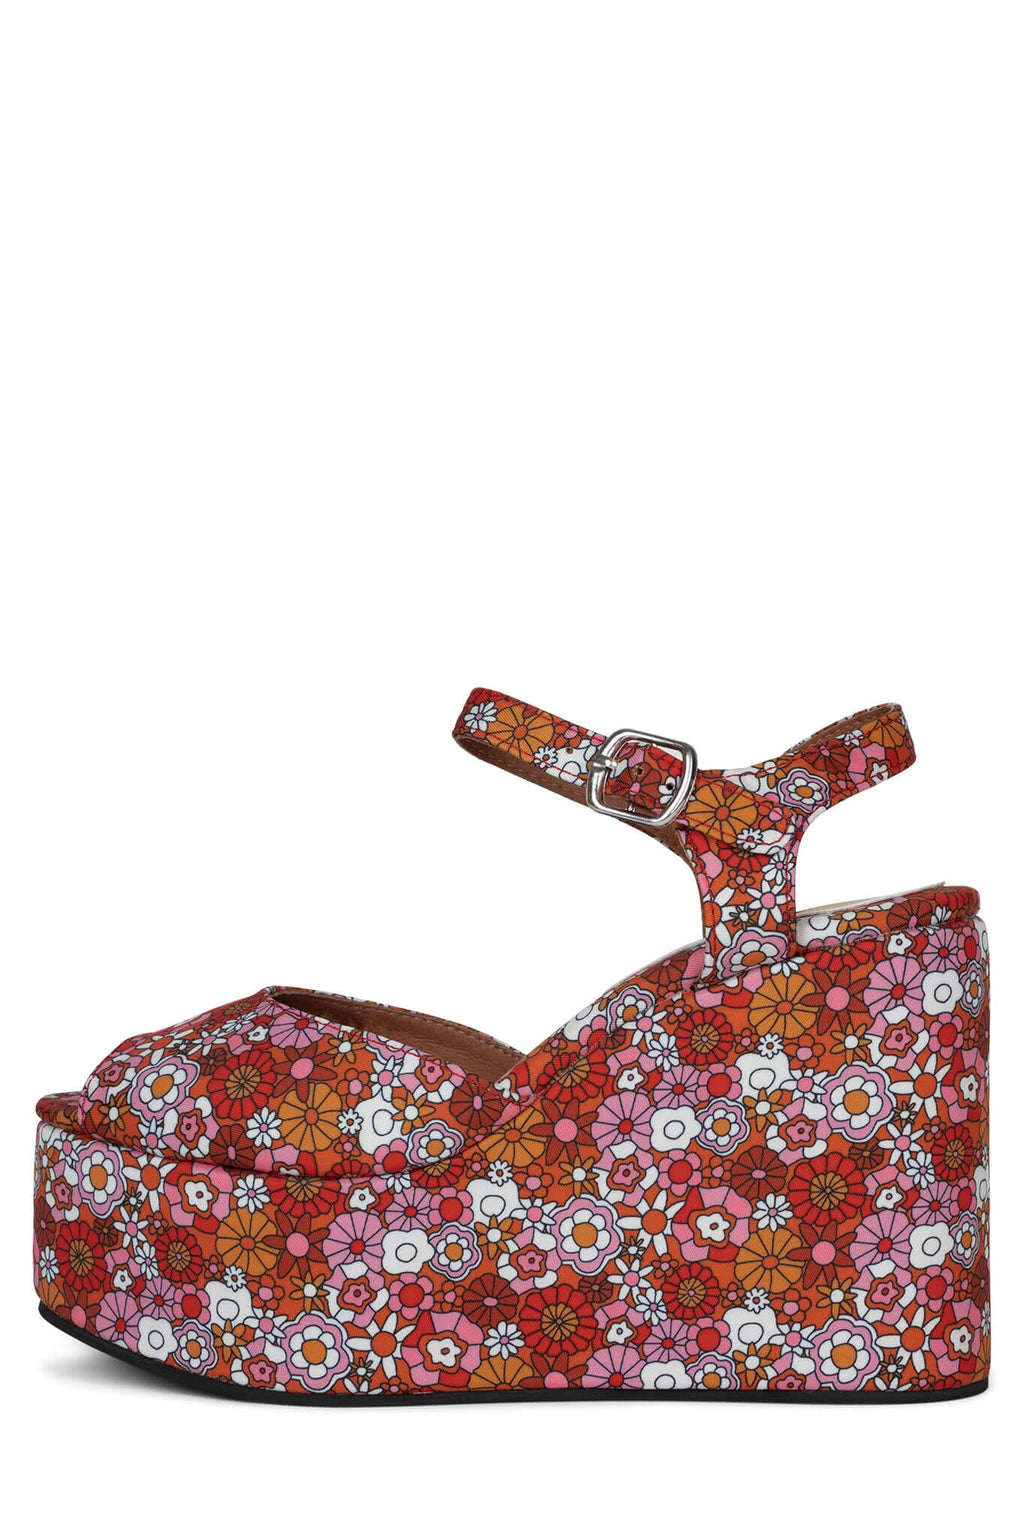 DAZING Jeffrey Campbell Red Pink Multi Floral 6 